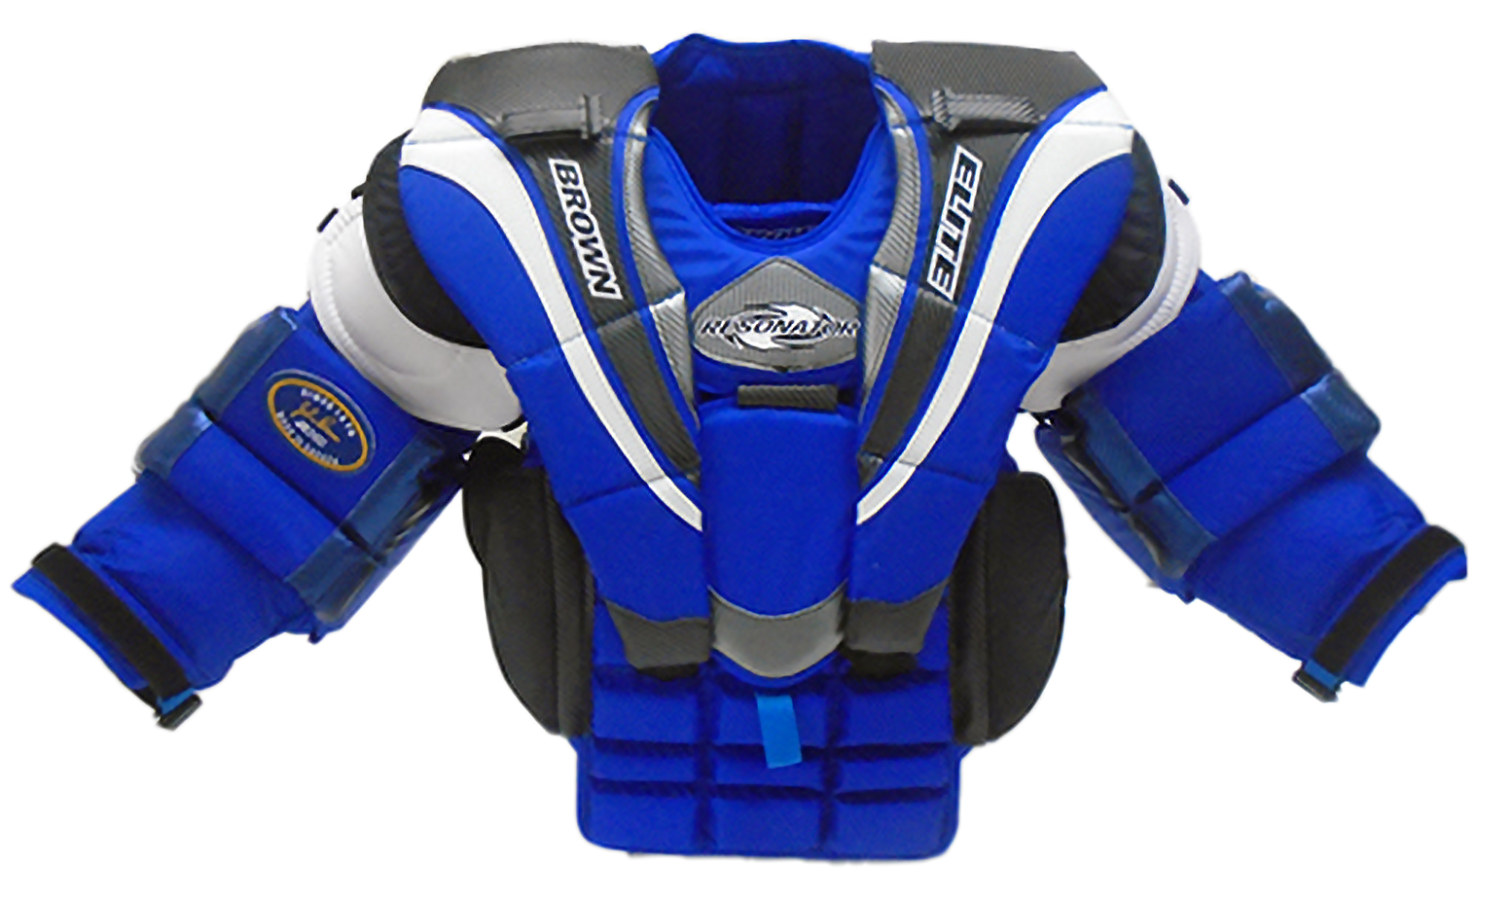 2400 blue and black chest protector